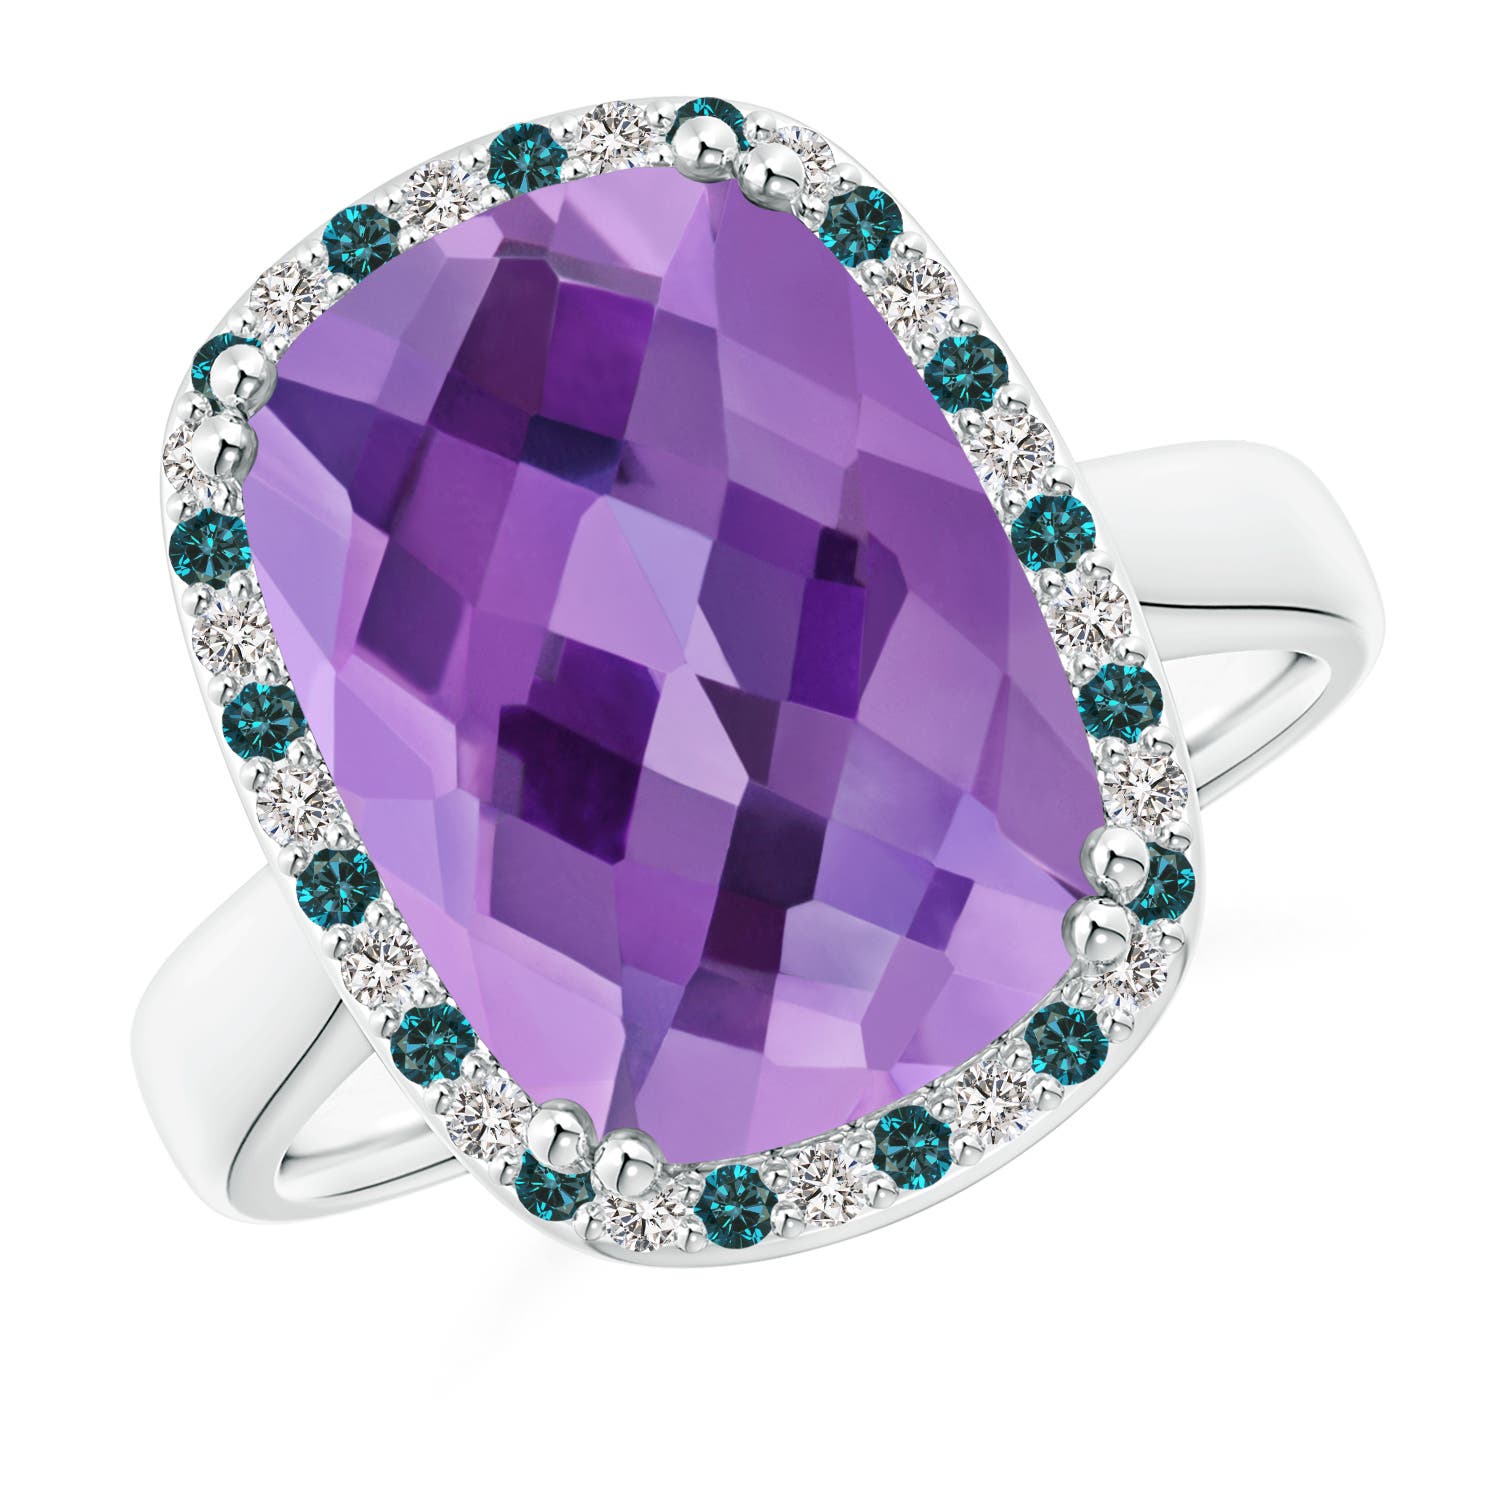 AA - Amethyst / 6.27 CT / 14 KT White Gold